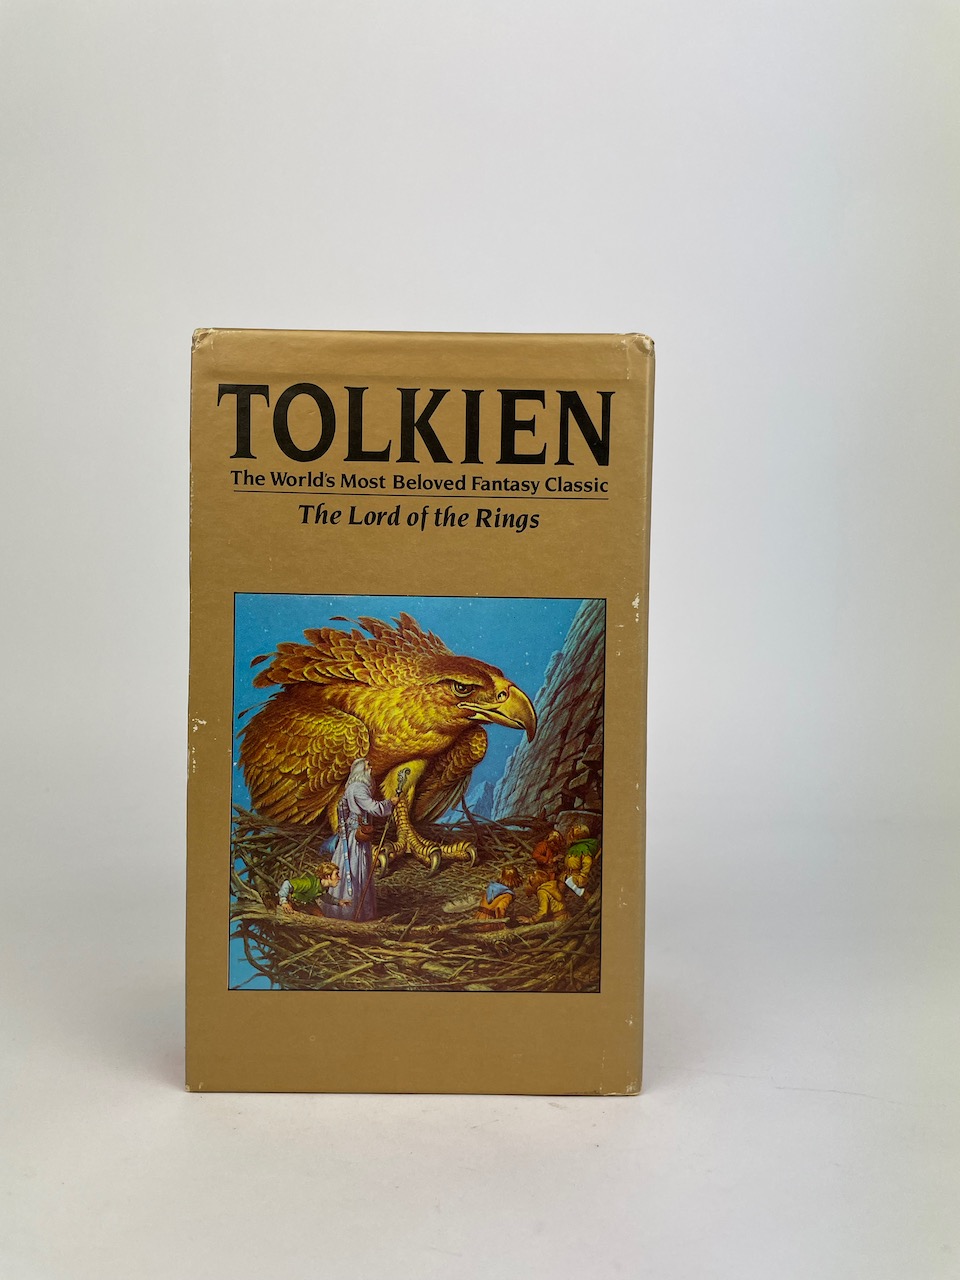 The Lord of the Rings and The Hobbit set from 1984, by Ballantine Books, New York 4